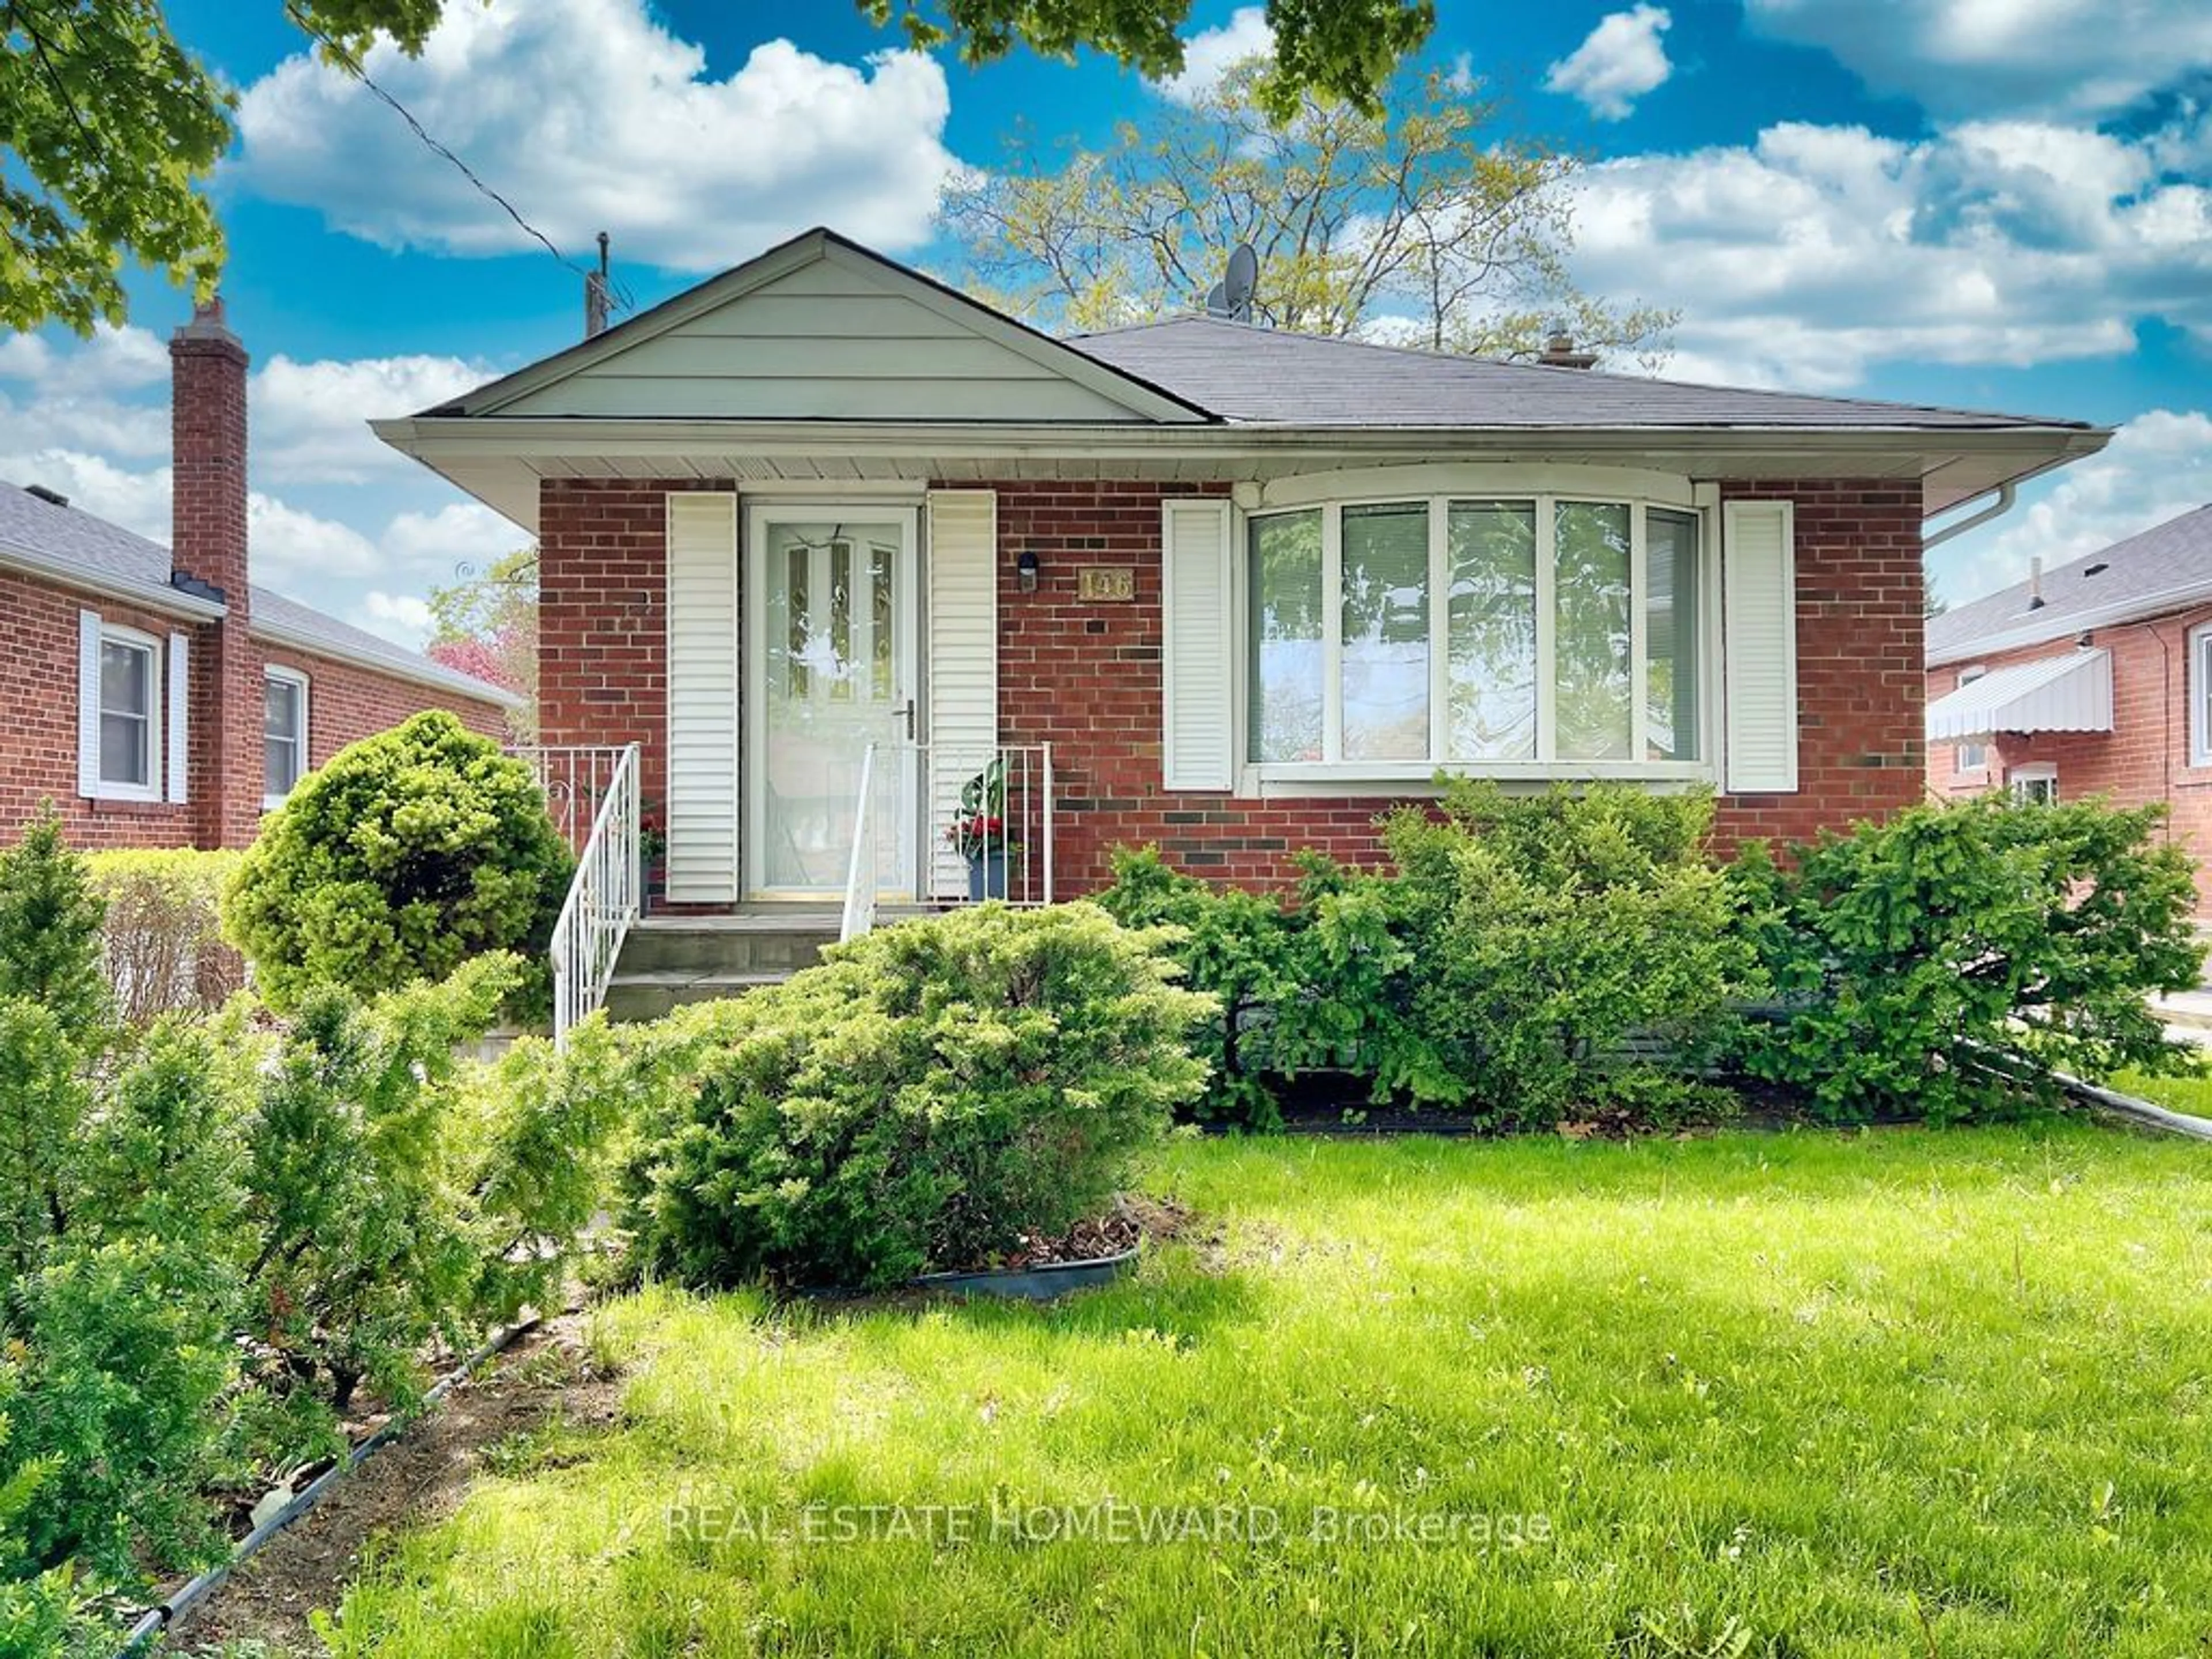 Home with brick exterior material for 146 North Carson St, Toronto Ontario M8W 4C9